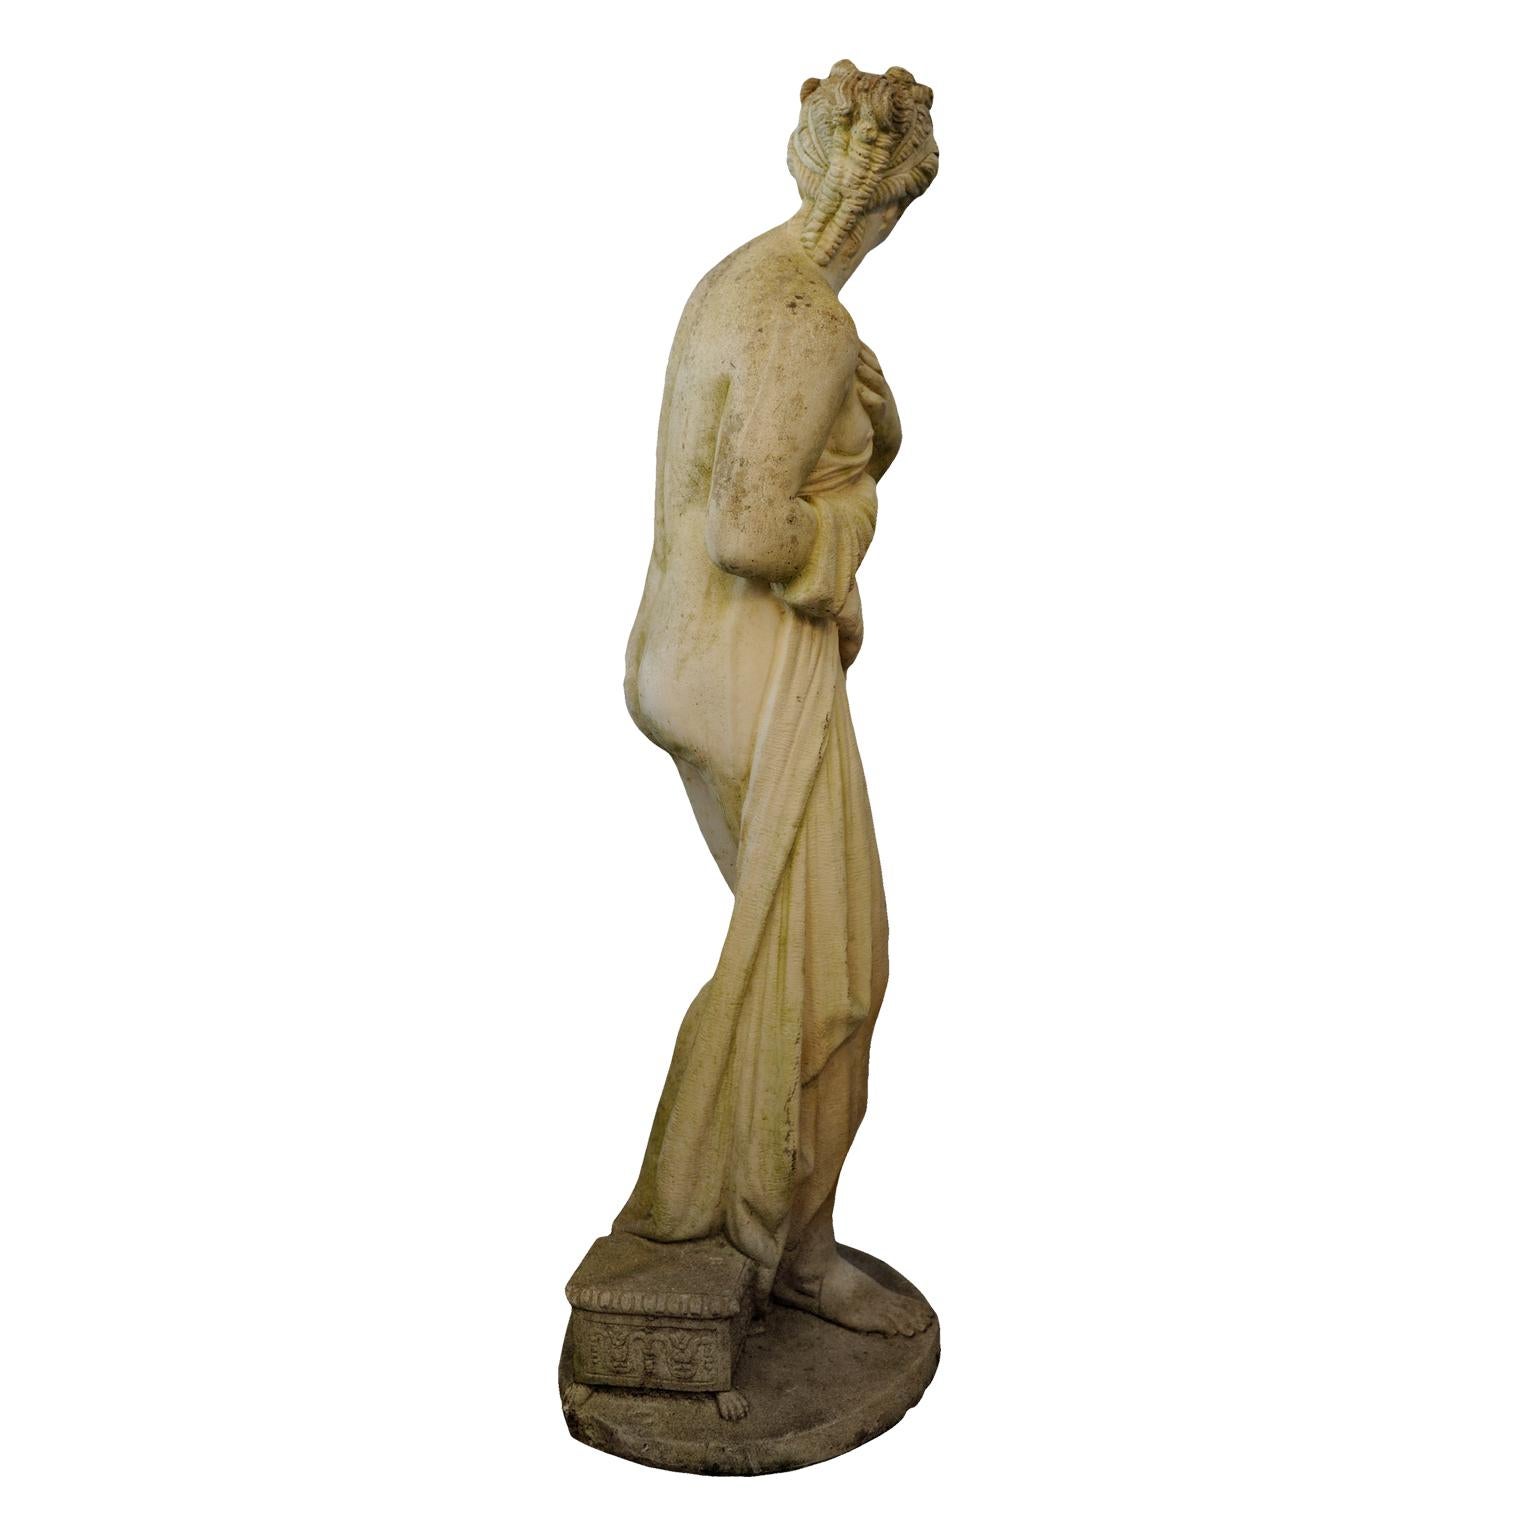 This is a very appealing large (two thirds life-size) midcentury composition neoclassical Figure of Venus leaving her bath, after the original by Antonio Canova. 

A lovely piece with great presence.